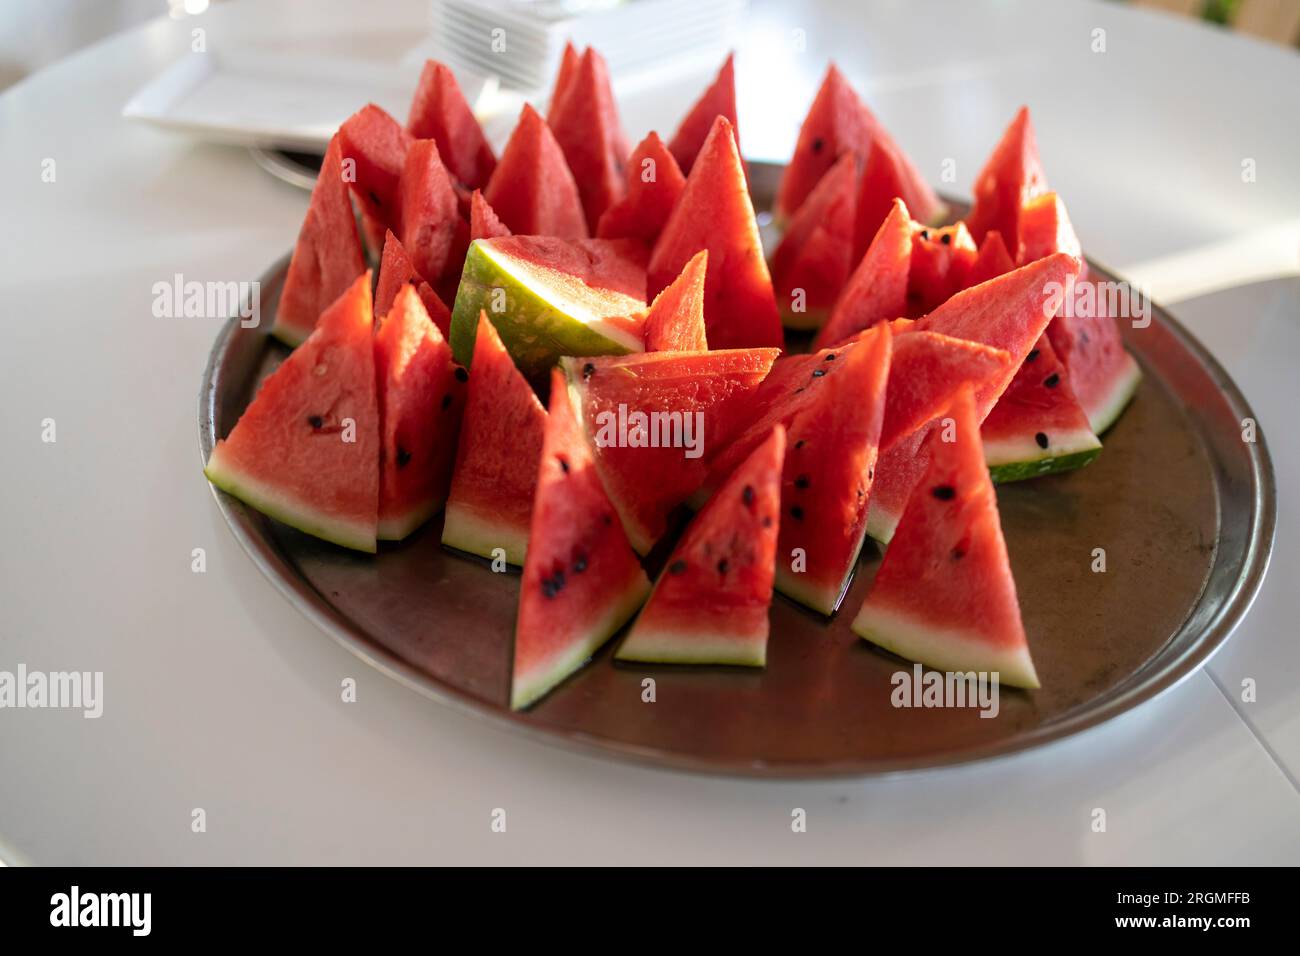 Lots of small triangular slices of ripe red watermelon on a plate. Isolated on white background. View from above Stock Photo